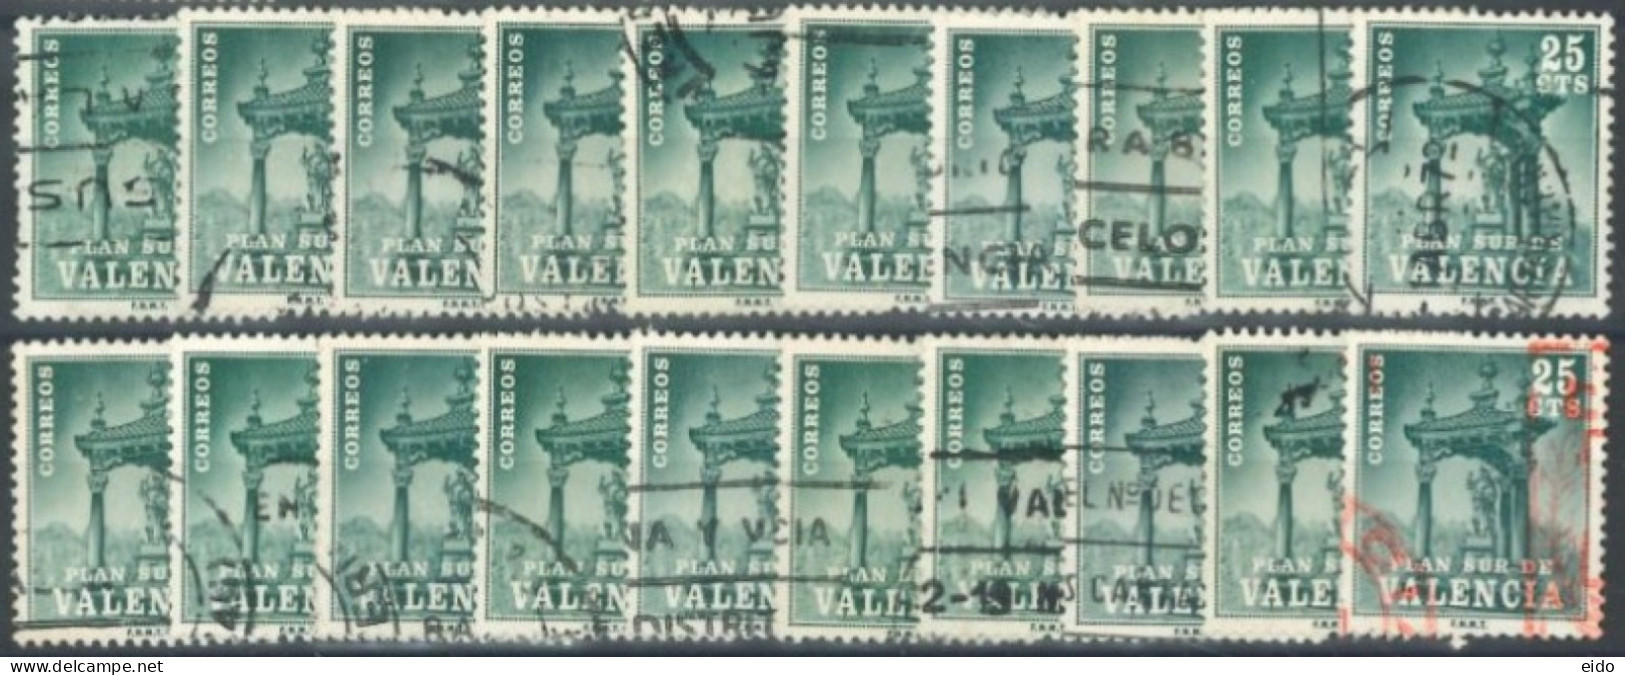 SPAIN, VALENCIA STAMP QTY. 20 DISCOUNTED (SPECIAL PRICE), USED. - Gebruikt